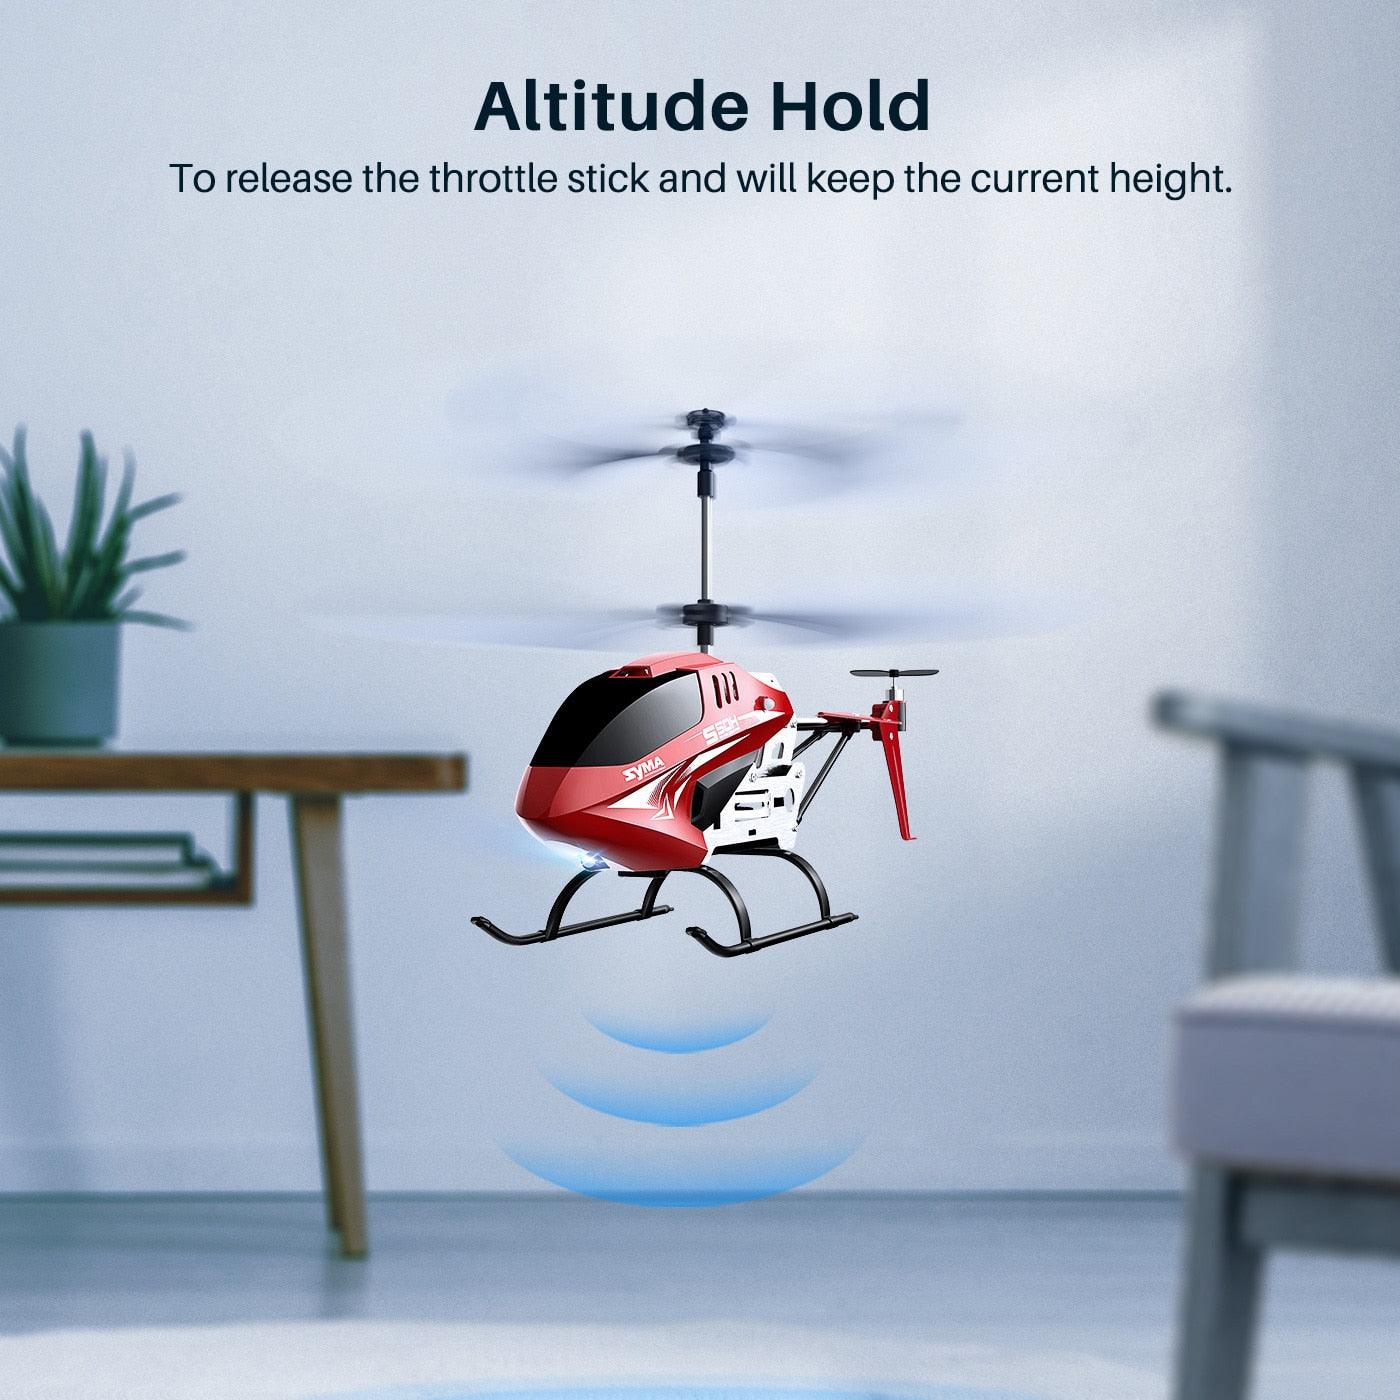 SYMA S50H RC Helicopter - Remote Control Aircraft Altitude Hold, One Key Take Off/Landing, Dual Protection System for Beginner - RCDrone